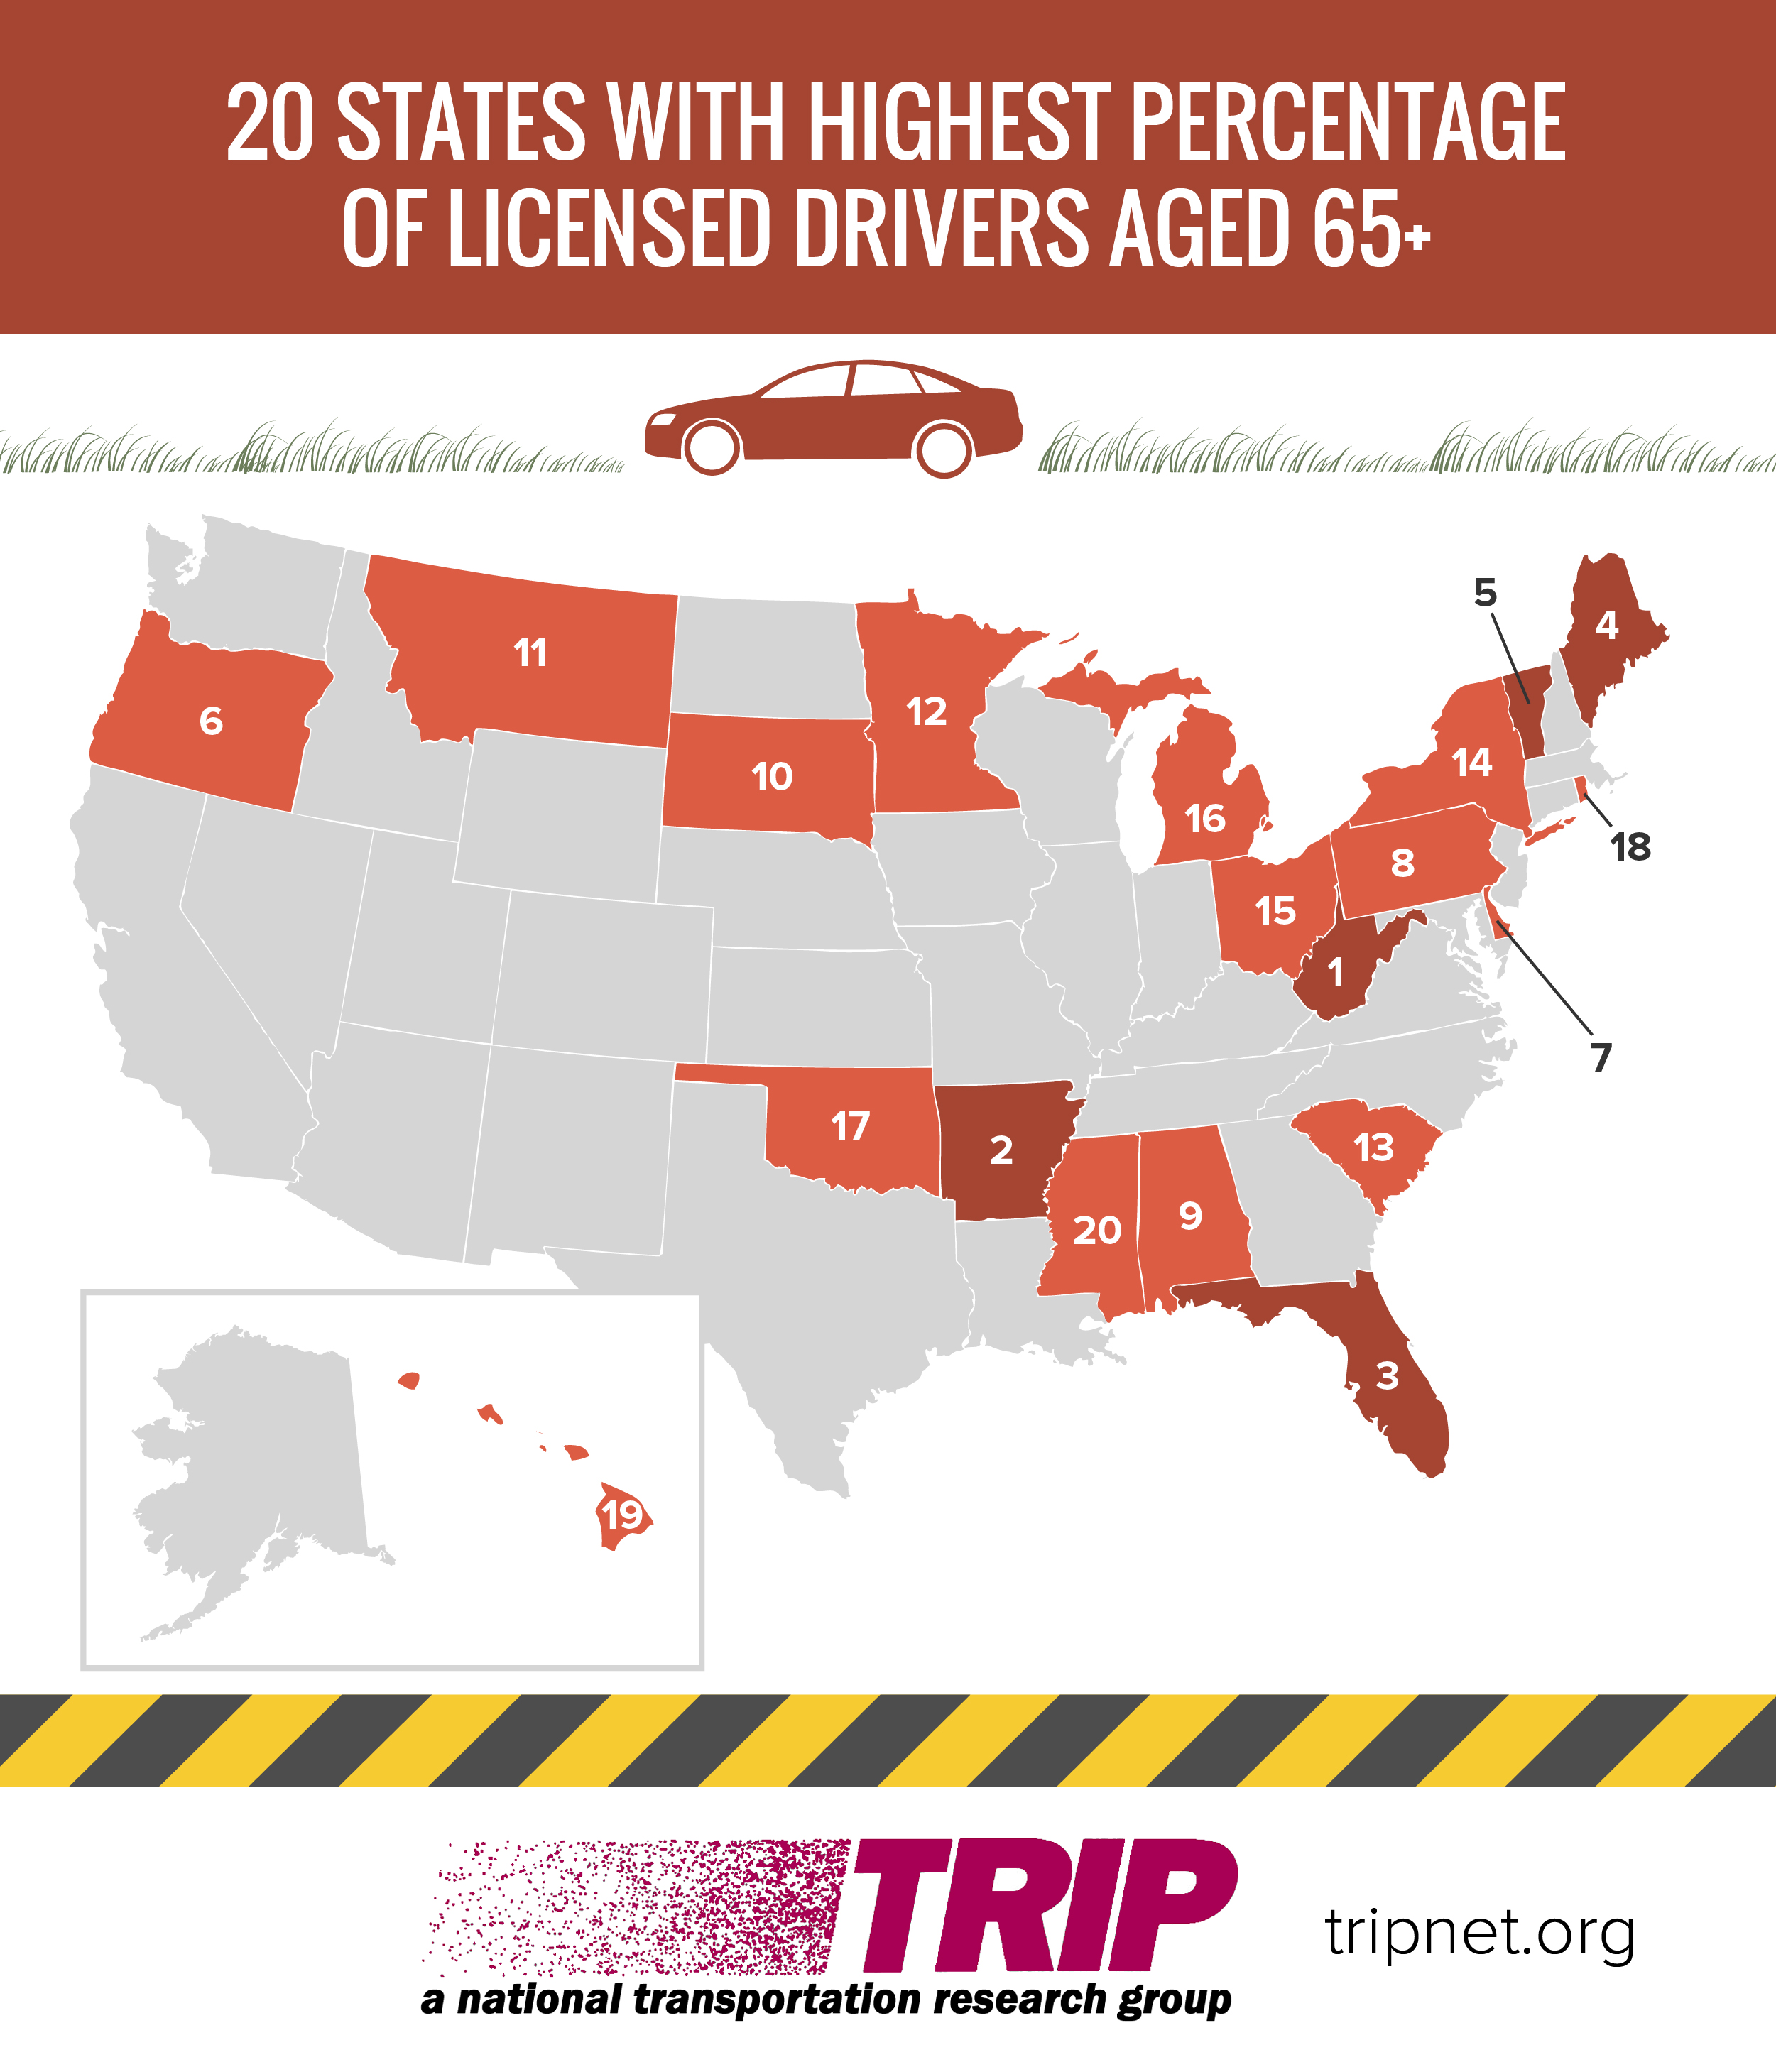 20 States with Highest Percentage of Licensed Drivers Aged 65+